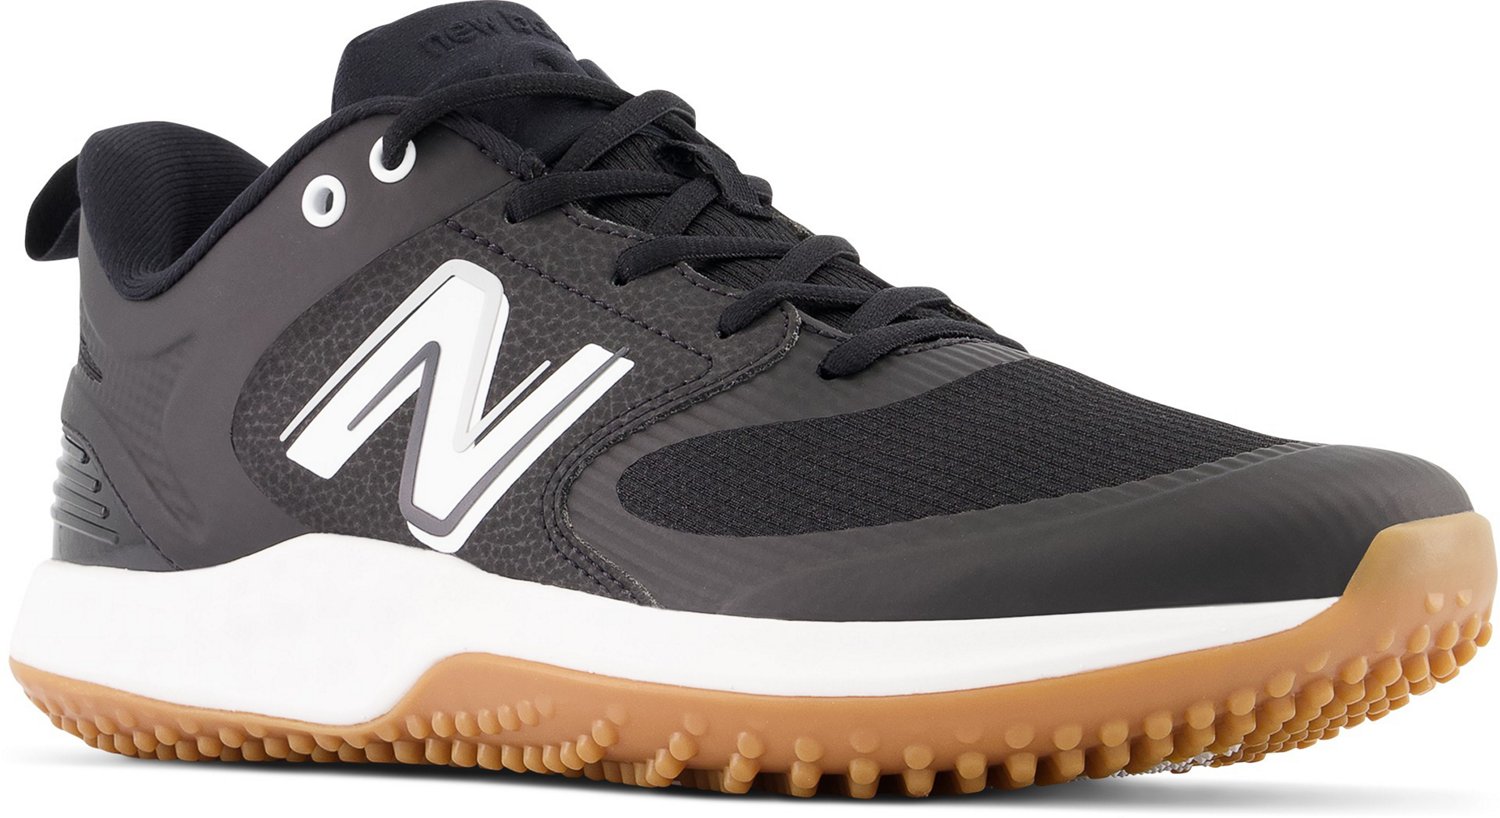 New Balance Men's T3000v6 Turf Baseball Cleats                                                                                   - view number 3